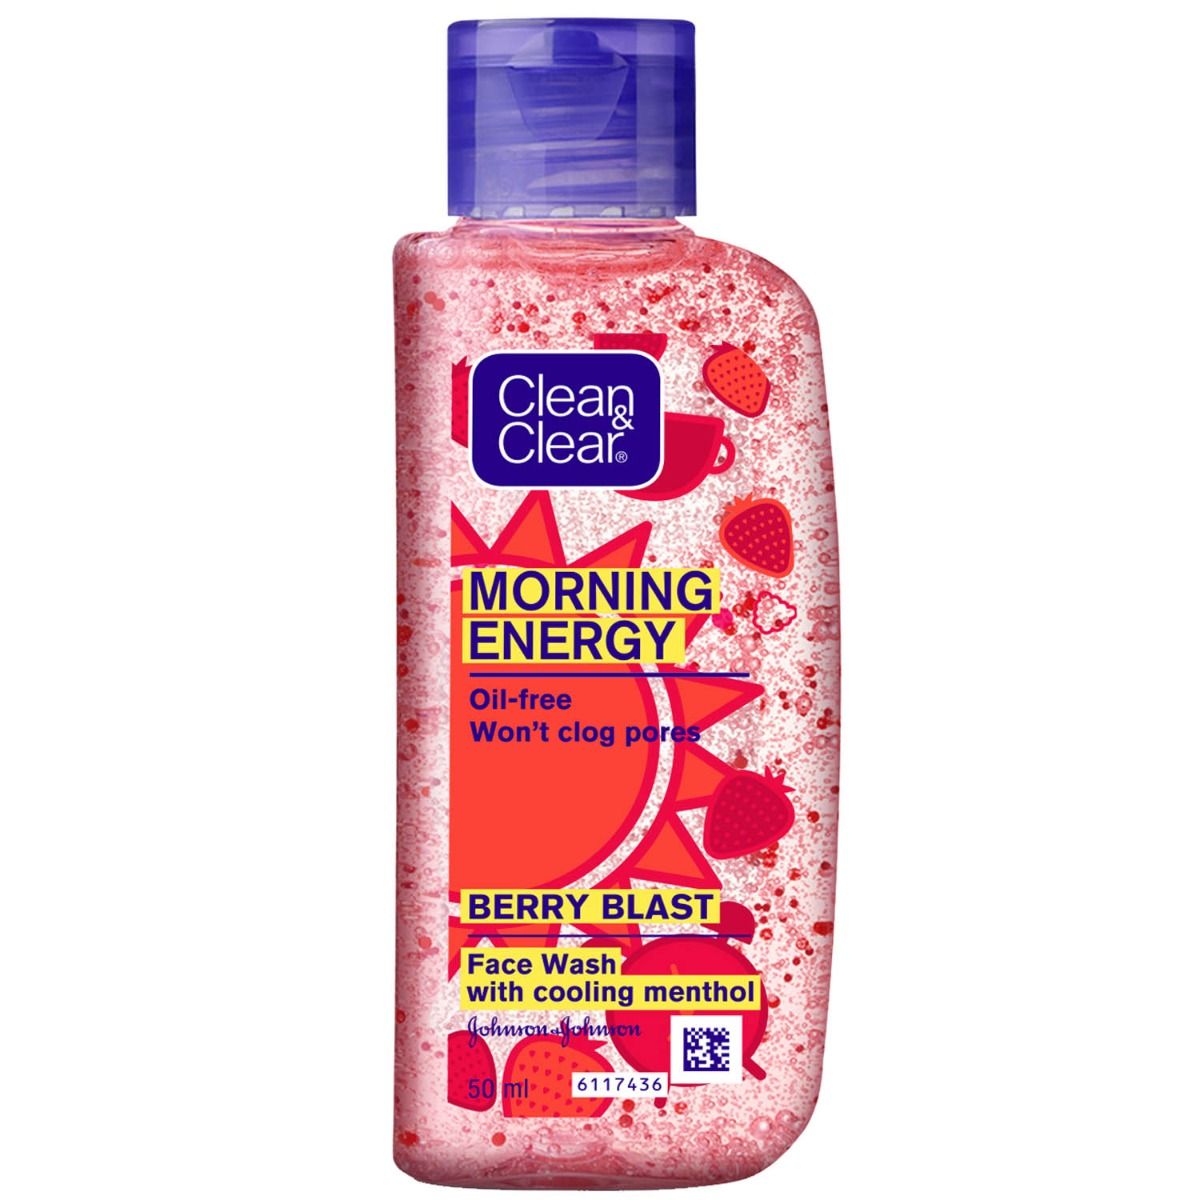 Buy Clean & Clear Morning Energy Oil-Free Berry Blast Face Wash, 50 ml Online